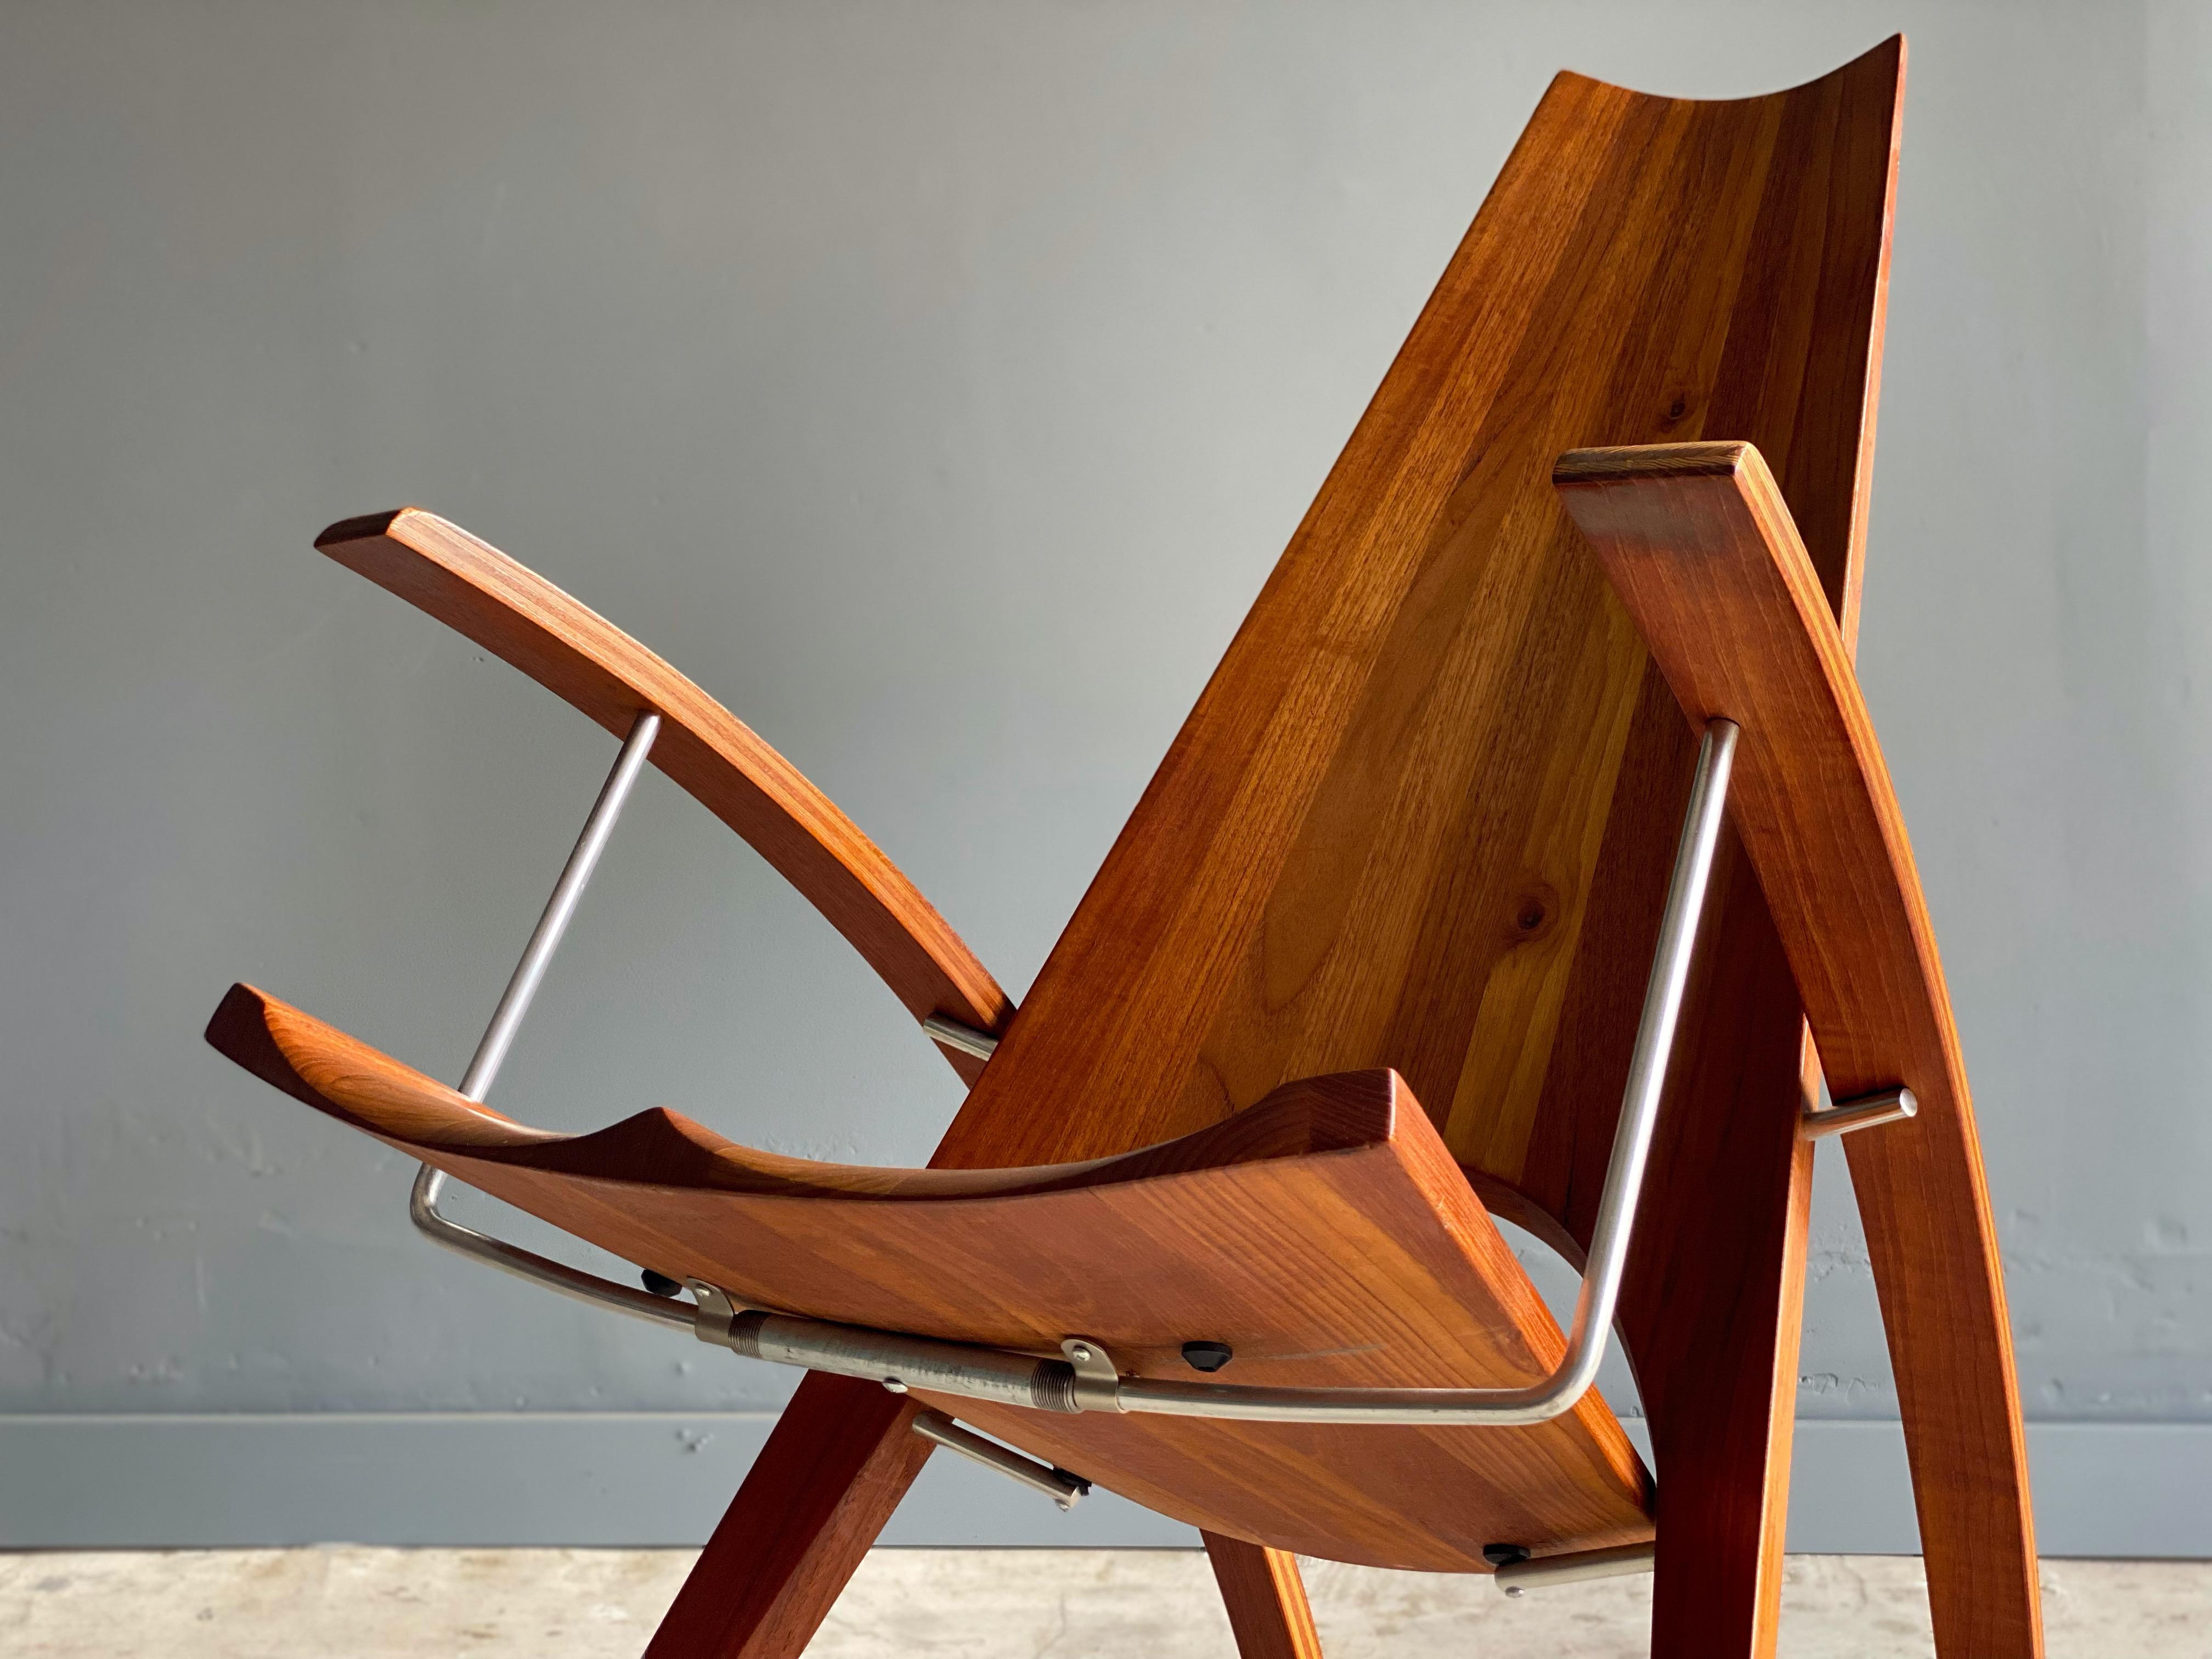 Stunning mid century studio rocking chair designed by Leon Meyer. Leon Meyer was a California architect most notably known for his Bay Area “round houses” during the 1960s. This example is hand crafted in solid teak with metal supports. Pencil